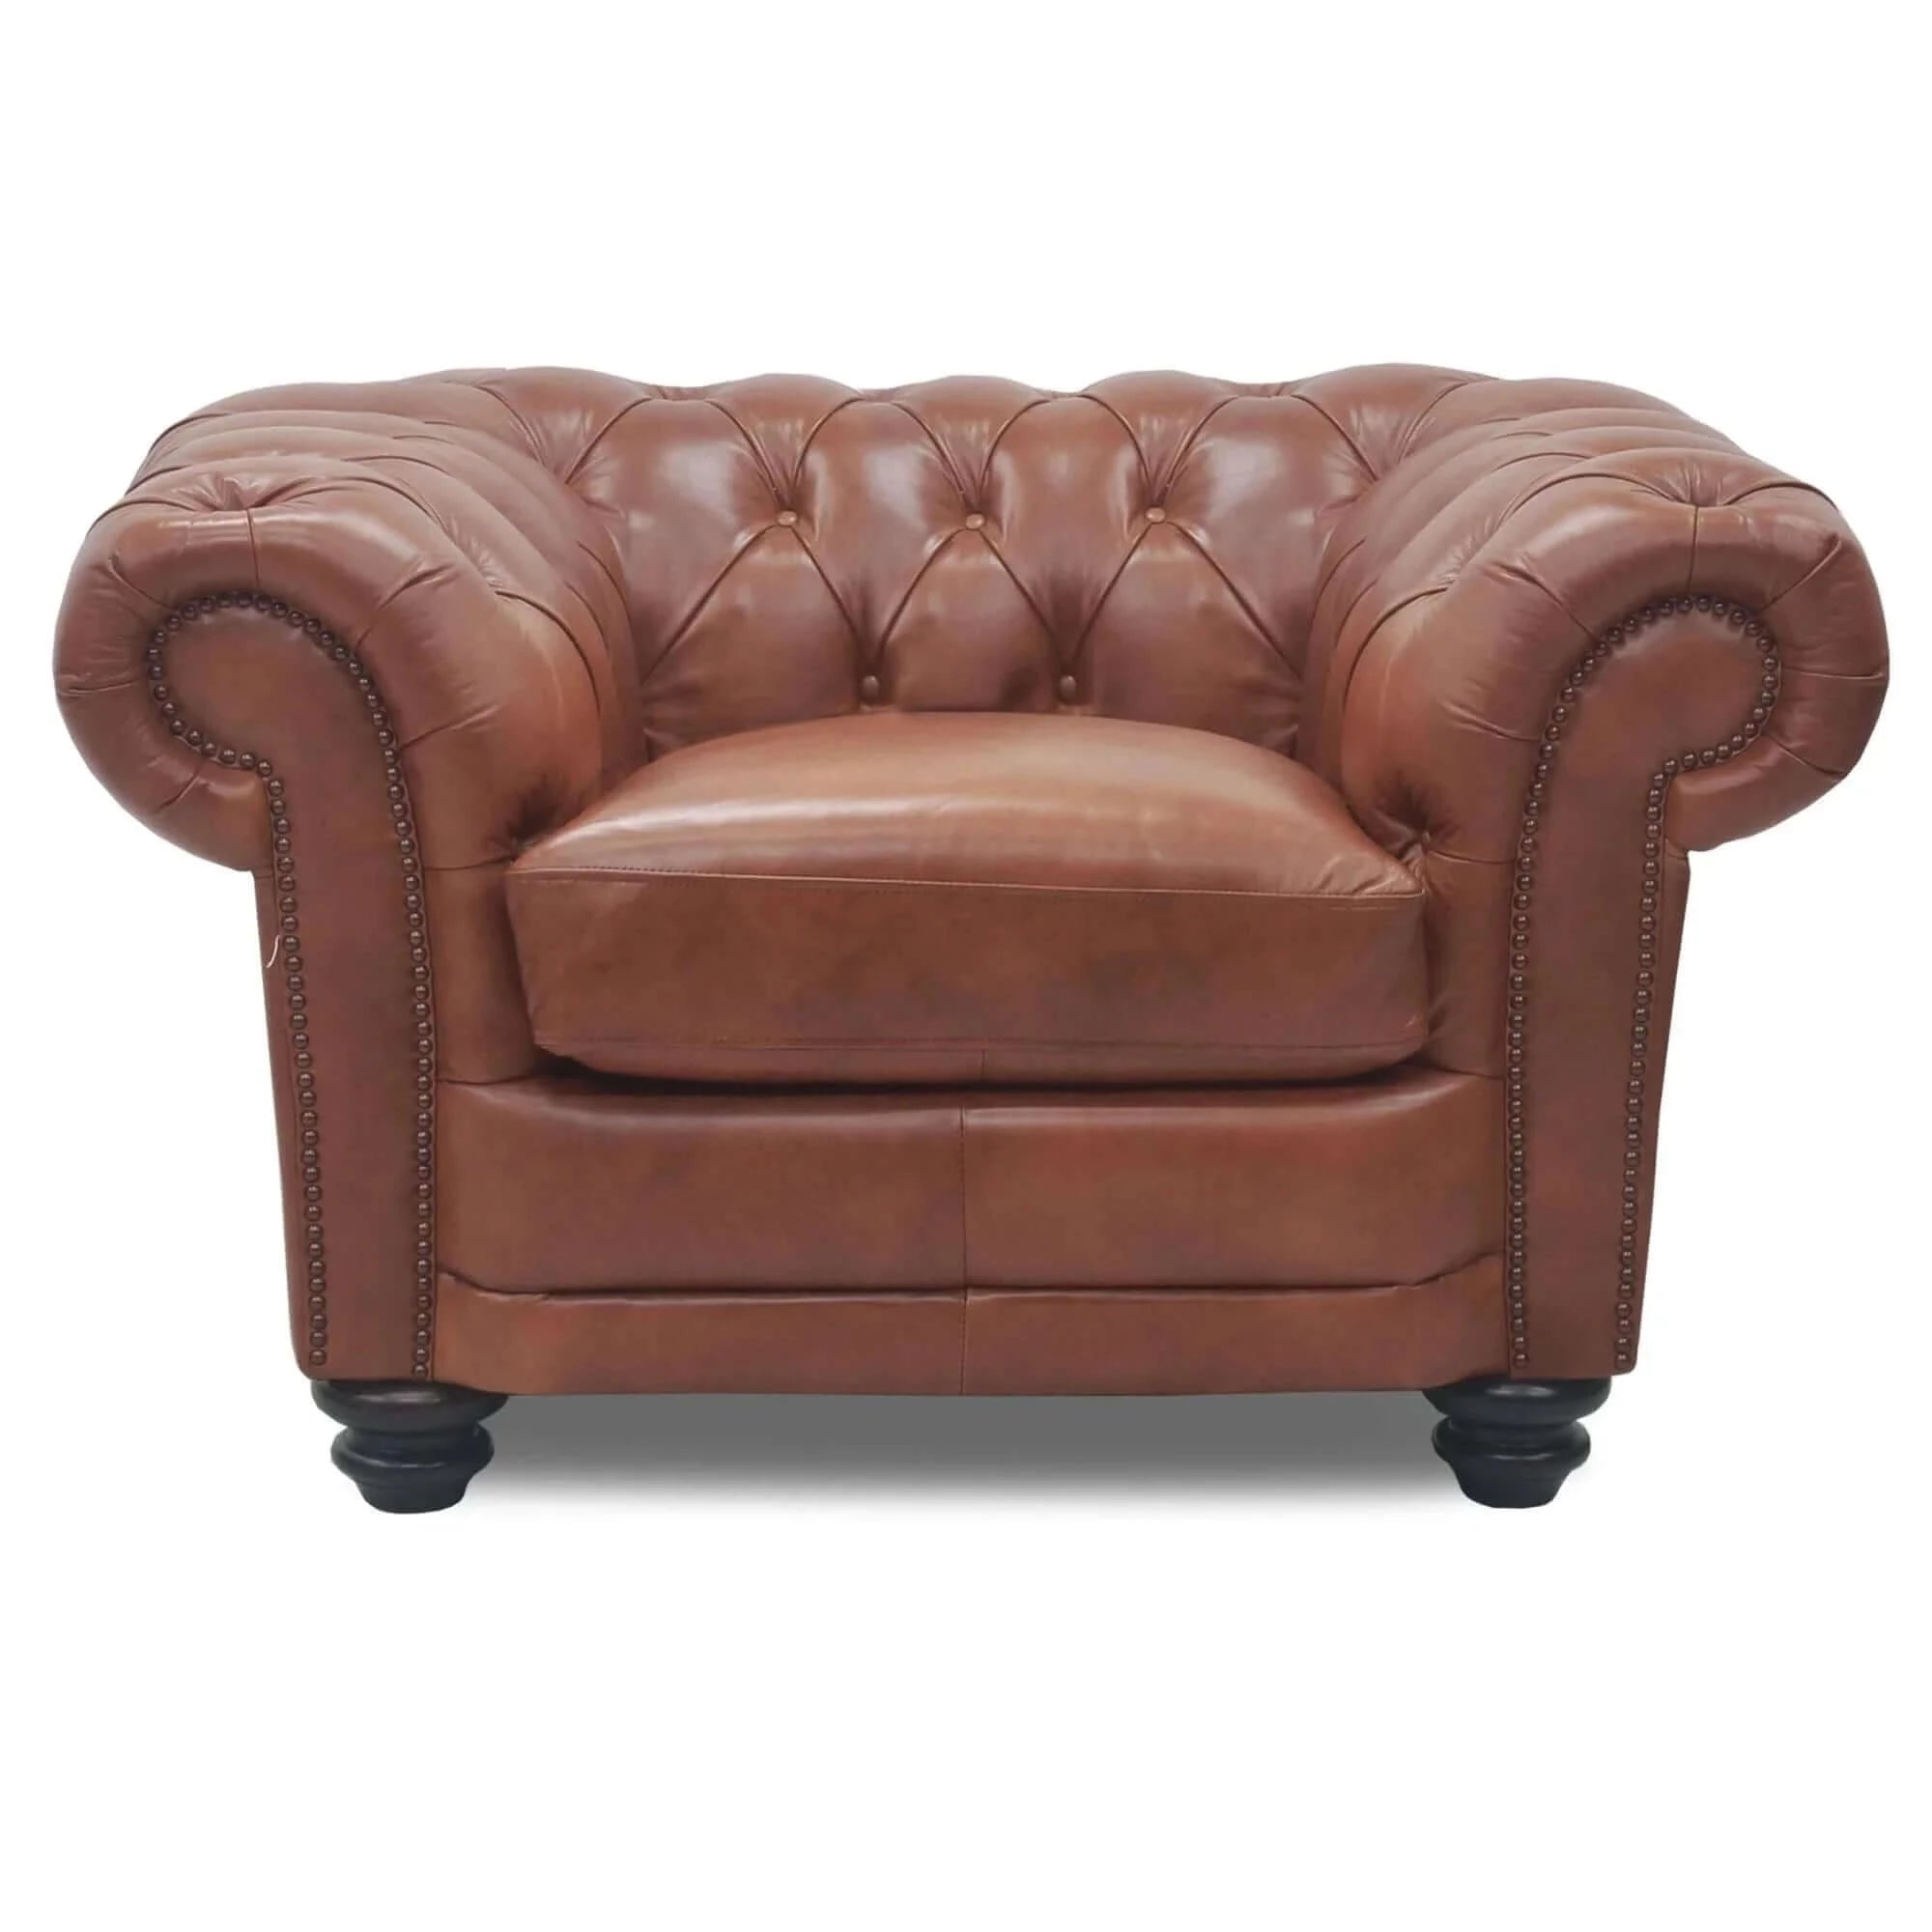 Buy sonny 2.5+1 seater genuine leather sofa chestfield lounge couch - butterscotch - upinteriors-Upinteriors